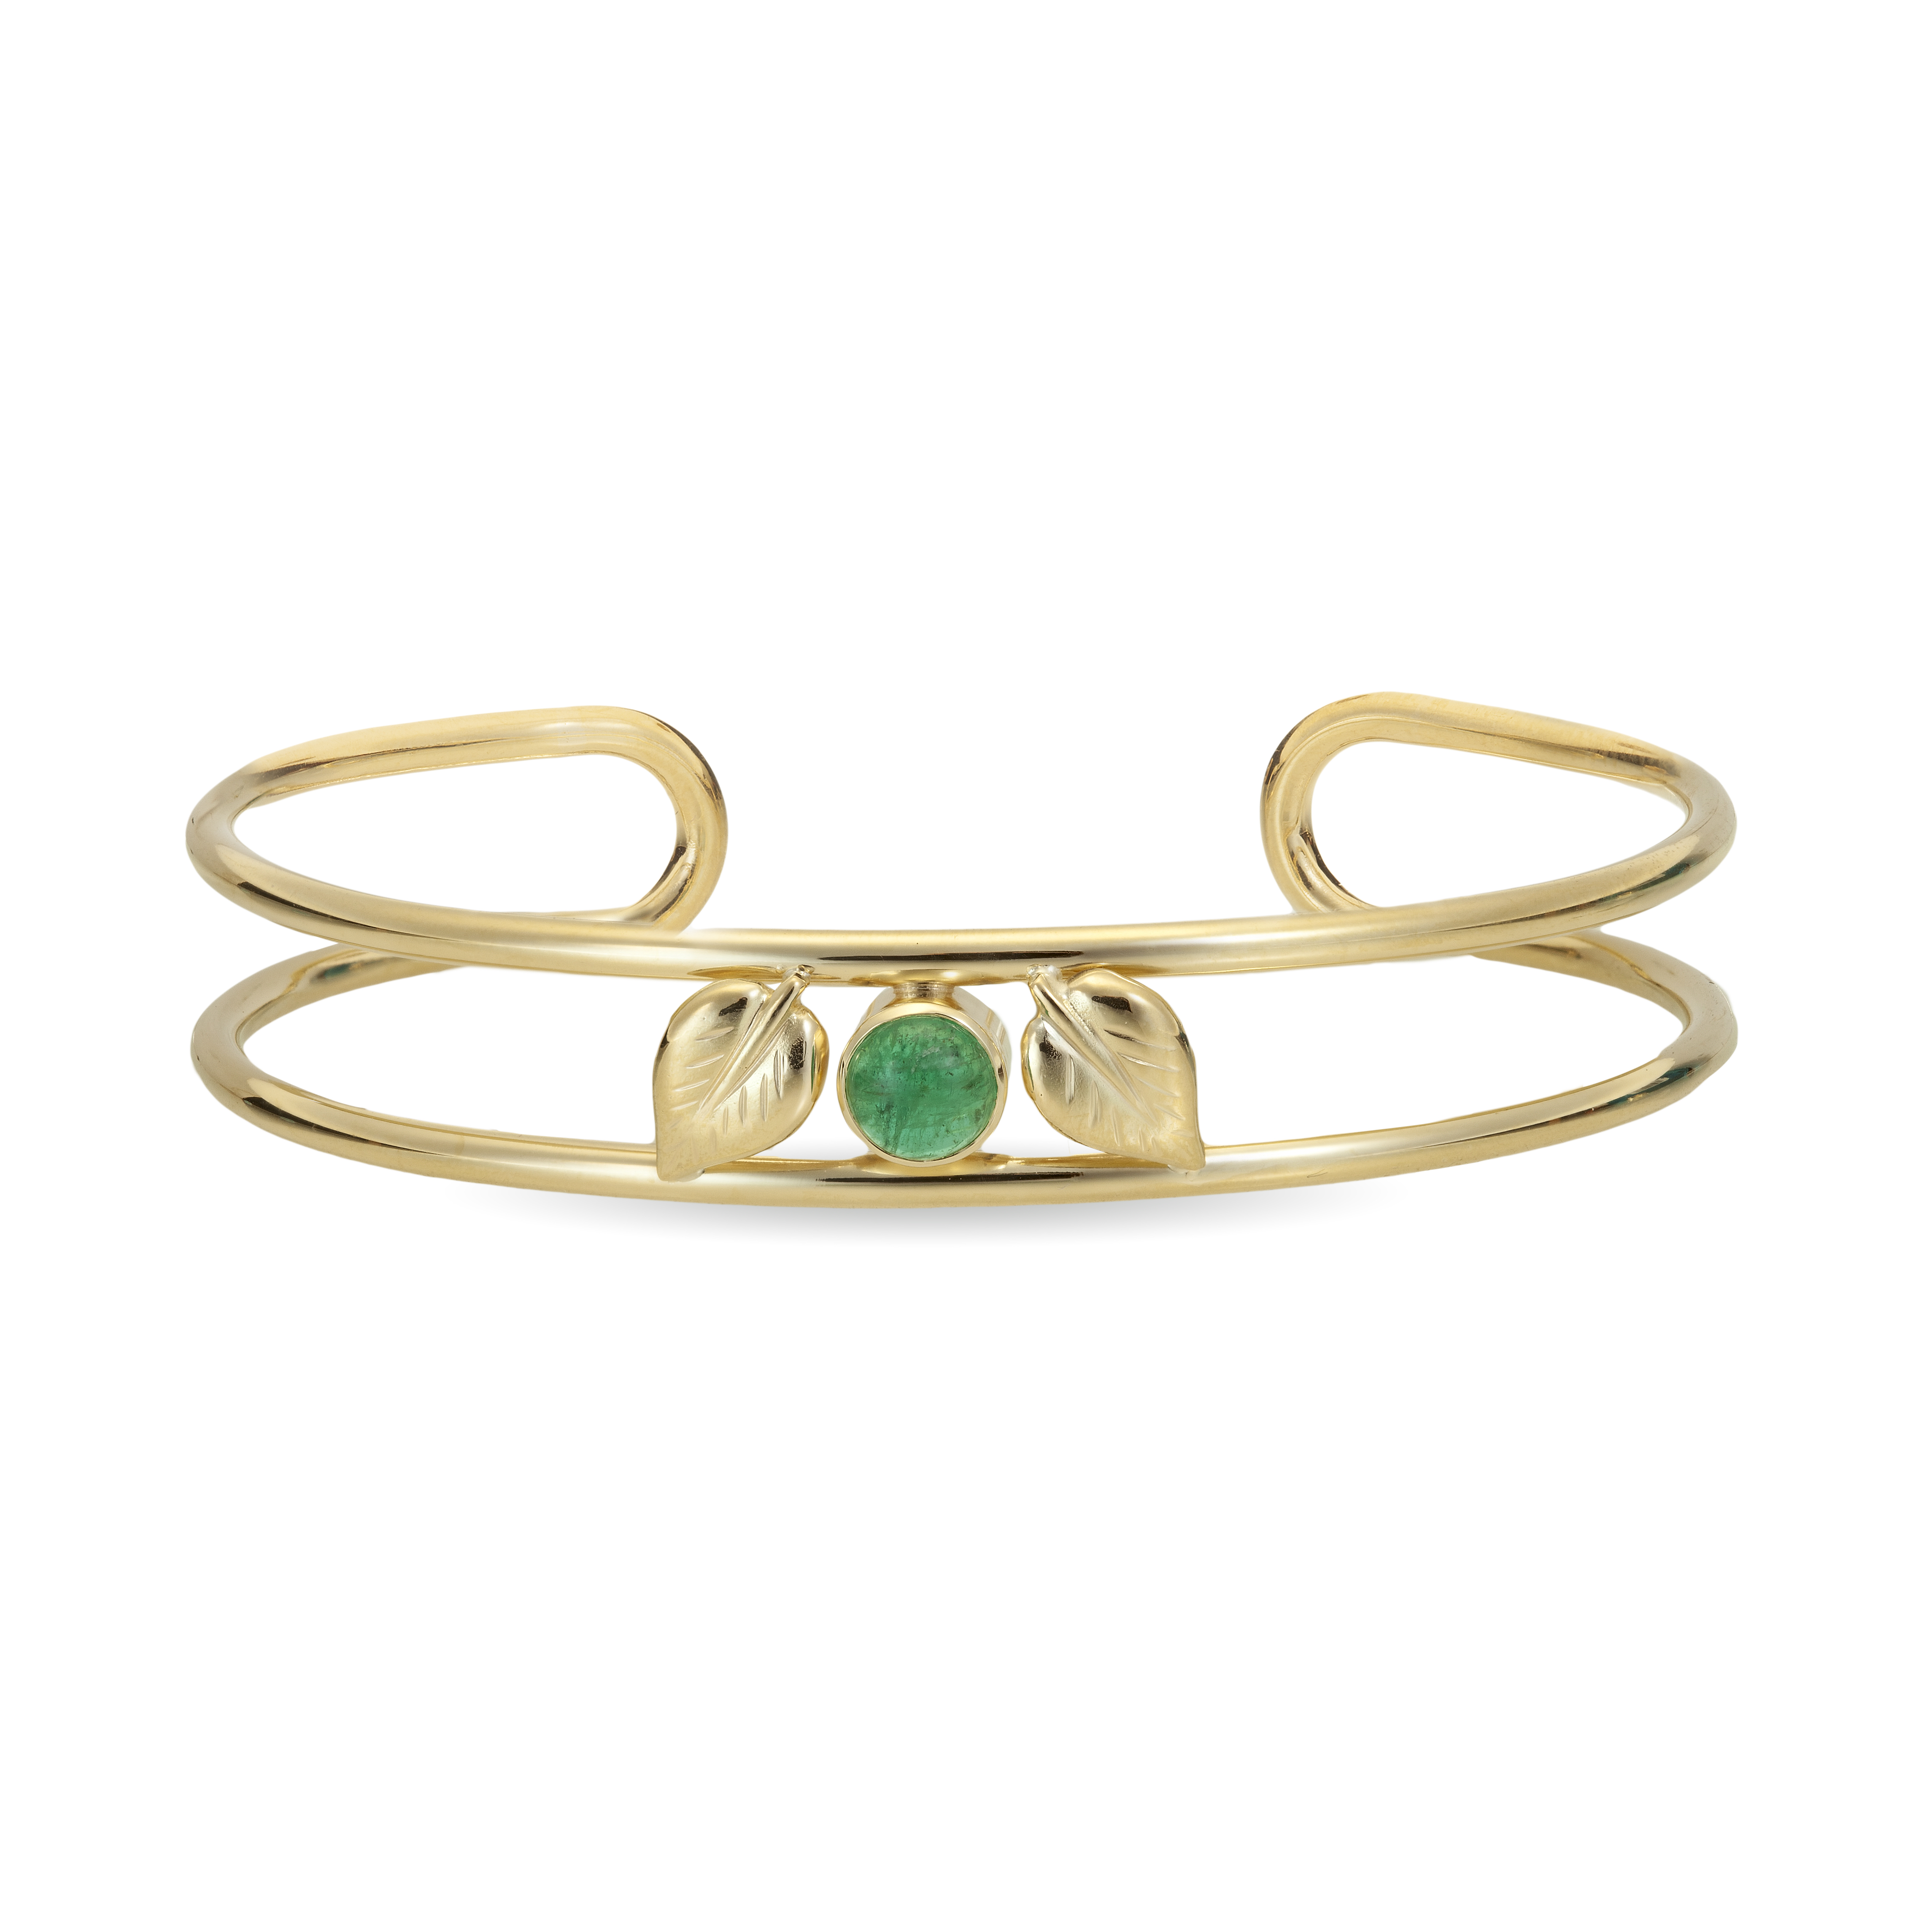 Christina Malle Leaf Bracelet in Fairmined 18 Karat Gold with Emerald. The Flora Collection